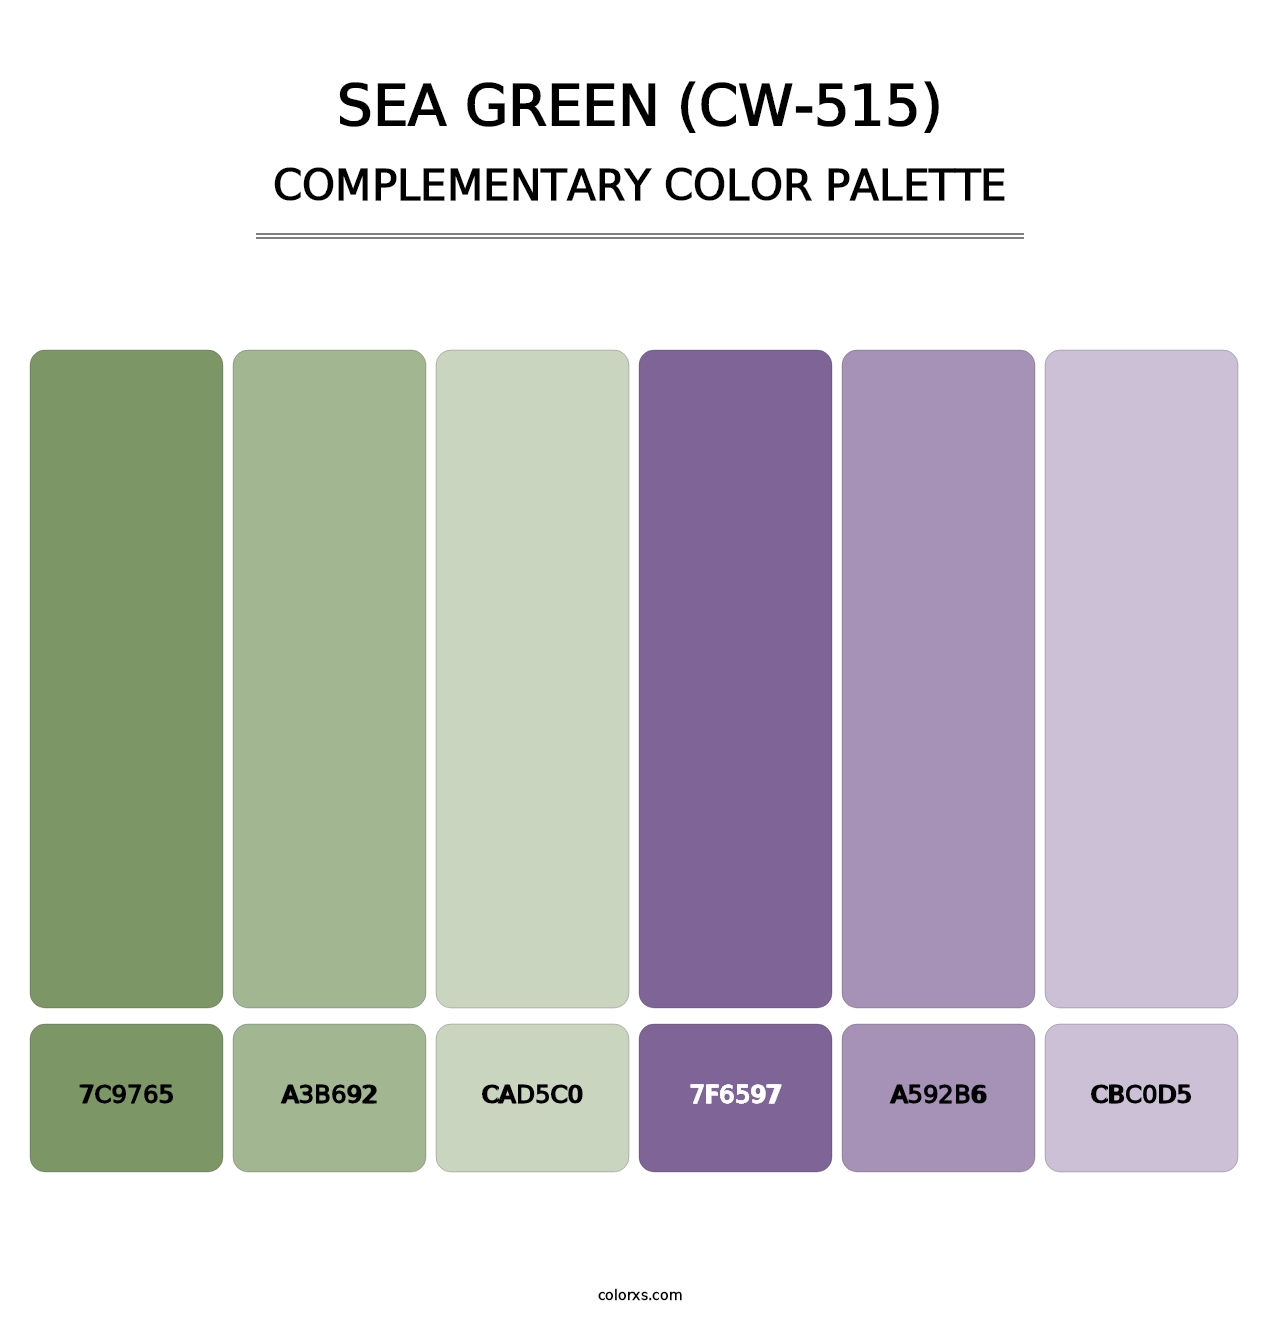 Sea Green (CW-515) - Complementary Color Palette